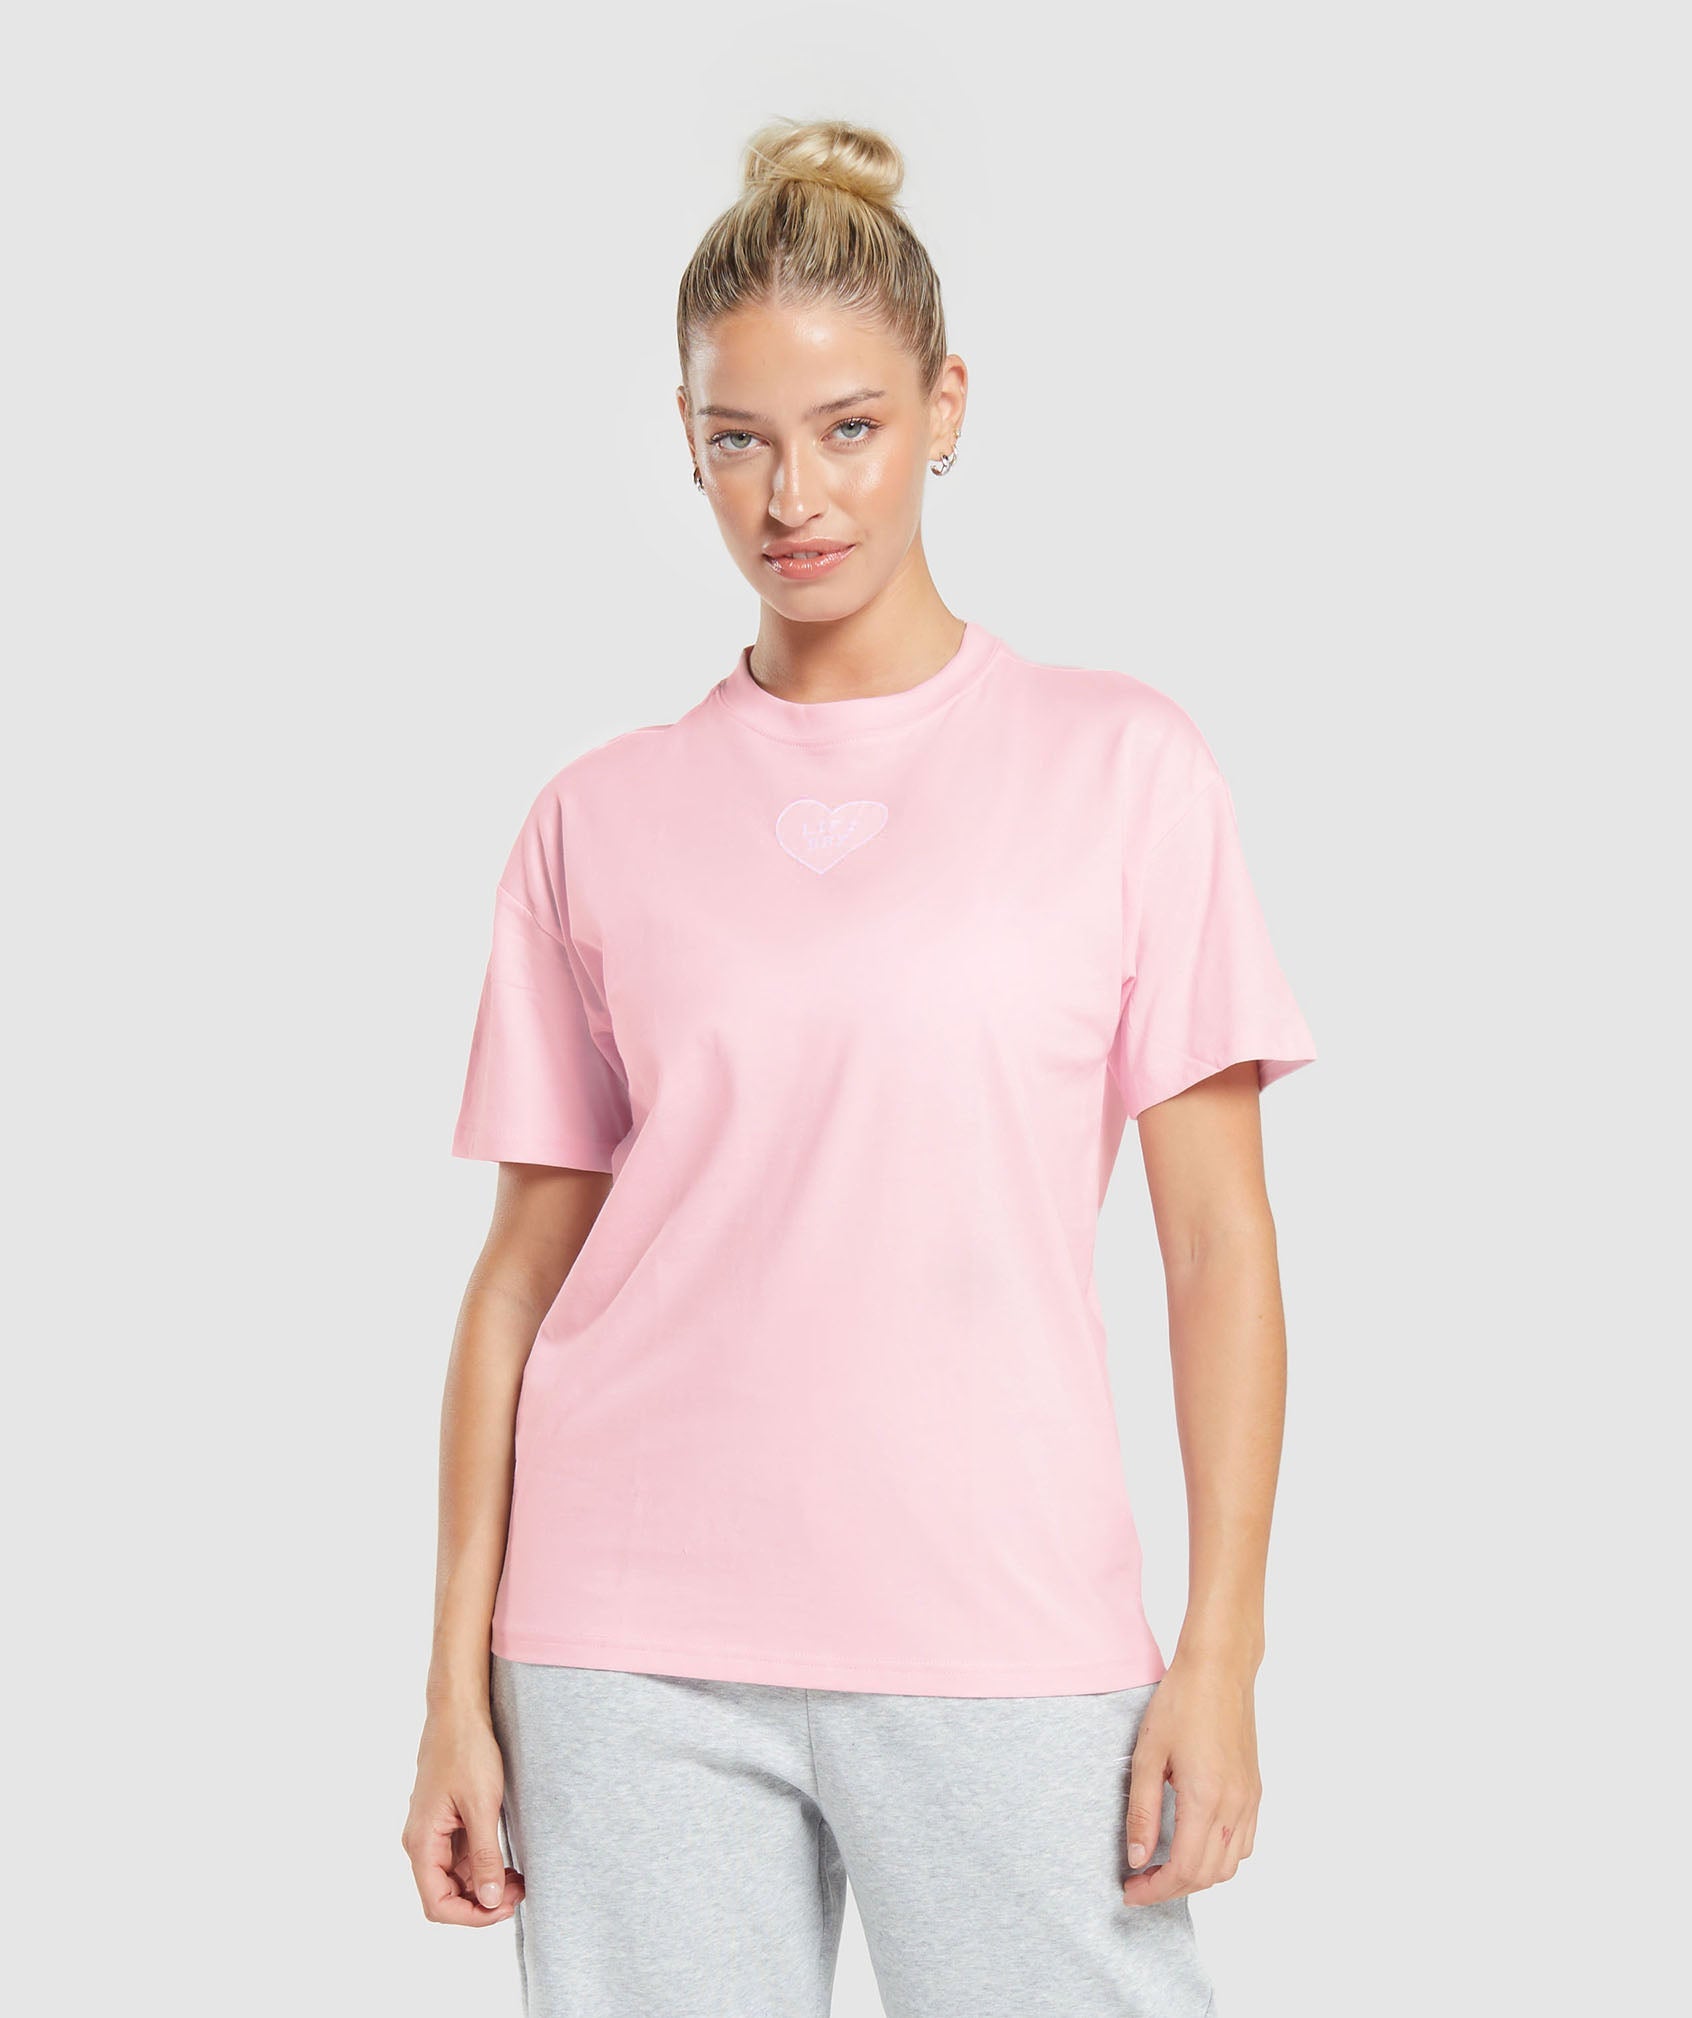 Gymshark Clear Athletic T-Shirts for Women